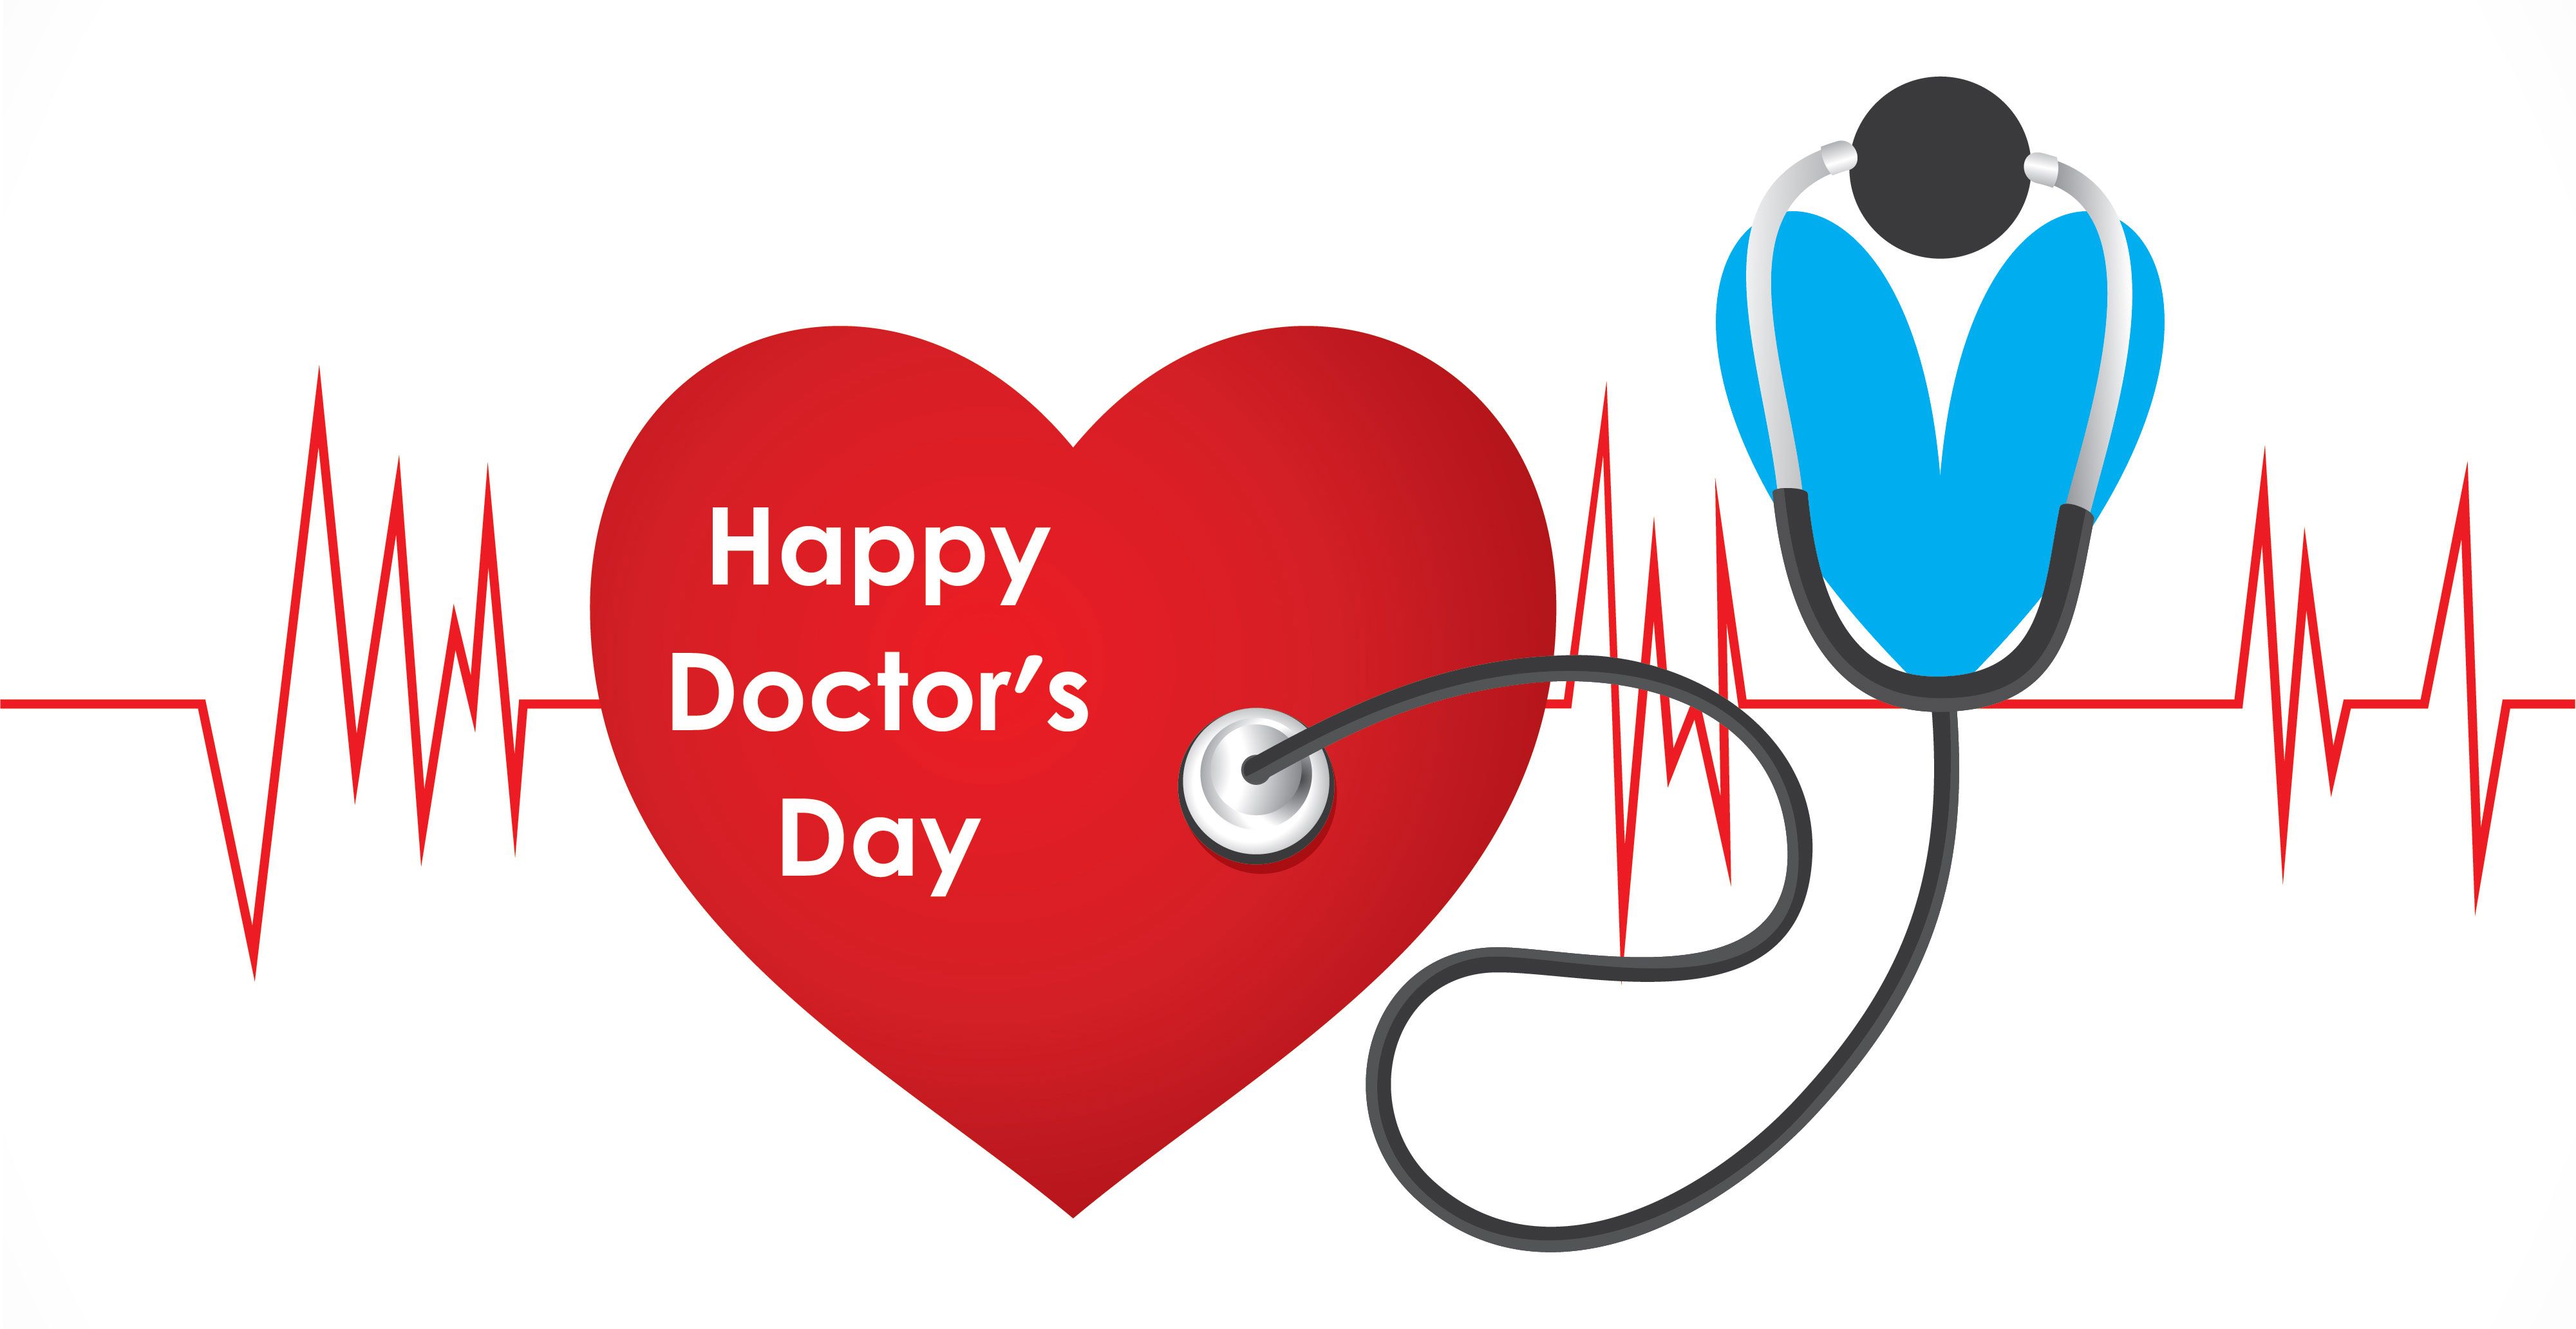 Happy National Doctors Day Wishes Quotes Message Image Picture Greetings 2017. Doctors day quotes, Happy doctors day image, National doctors day